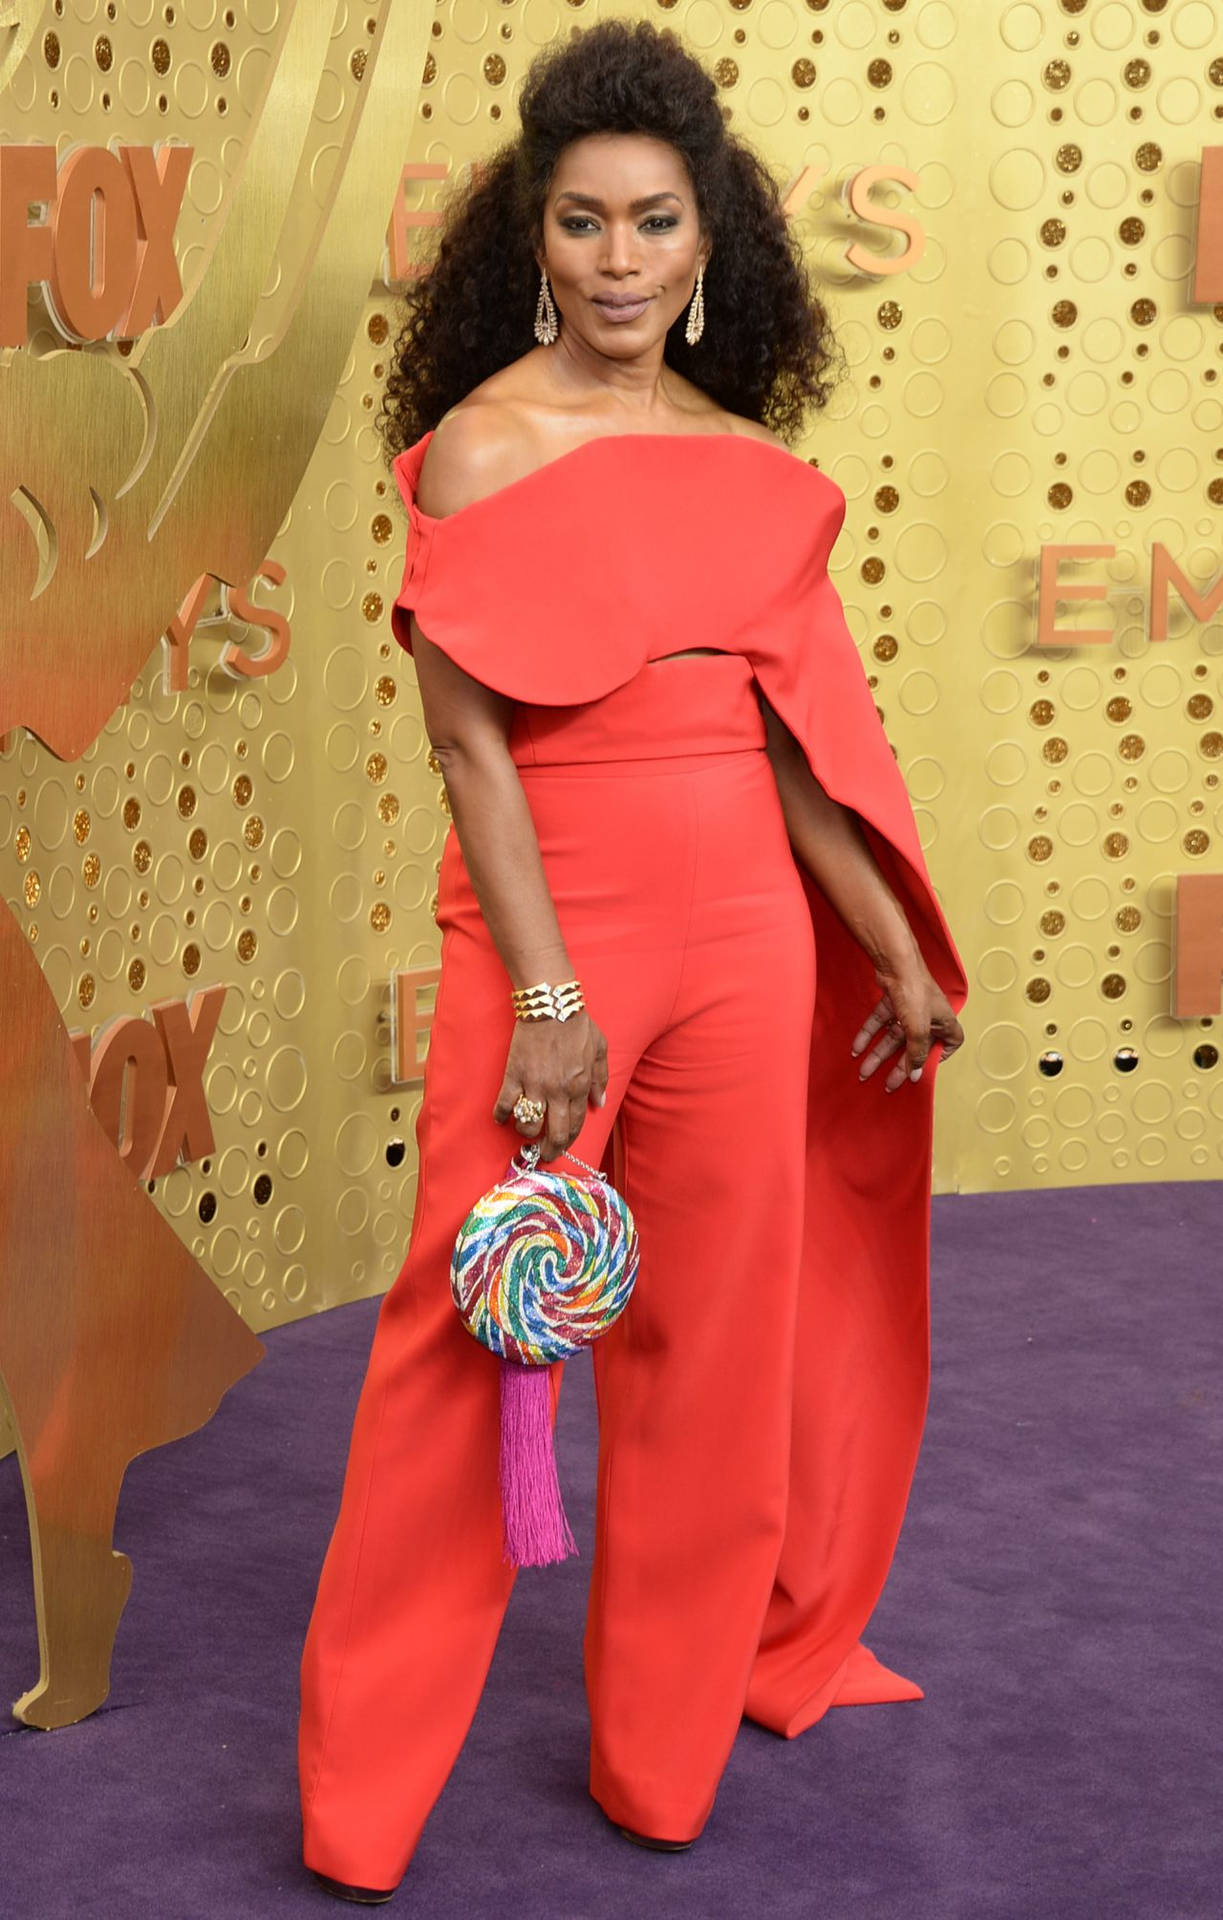 Angelabassett Emmys Award 2019 Is Not Applicable In The Context Of Computer Or Mobile Wallpaper, As It Is A Specific Event Or Accolade Received By Angela Bassett. However, If You Want To Express Admiration For Angela Bassett Or Highlight Her Achievements, You Could Say: 